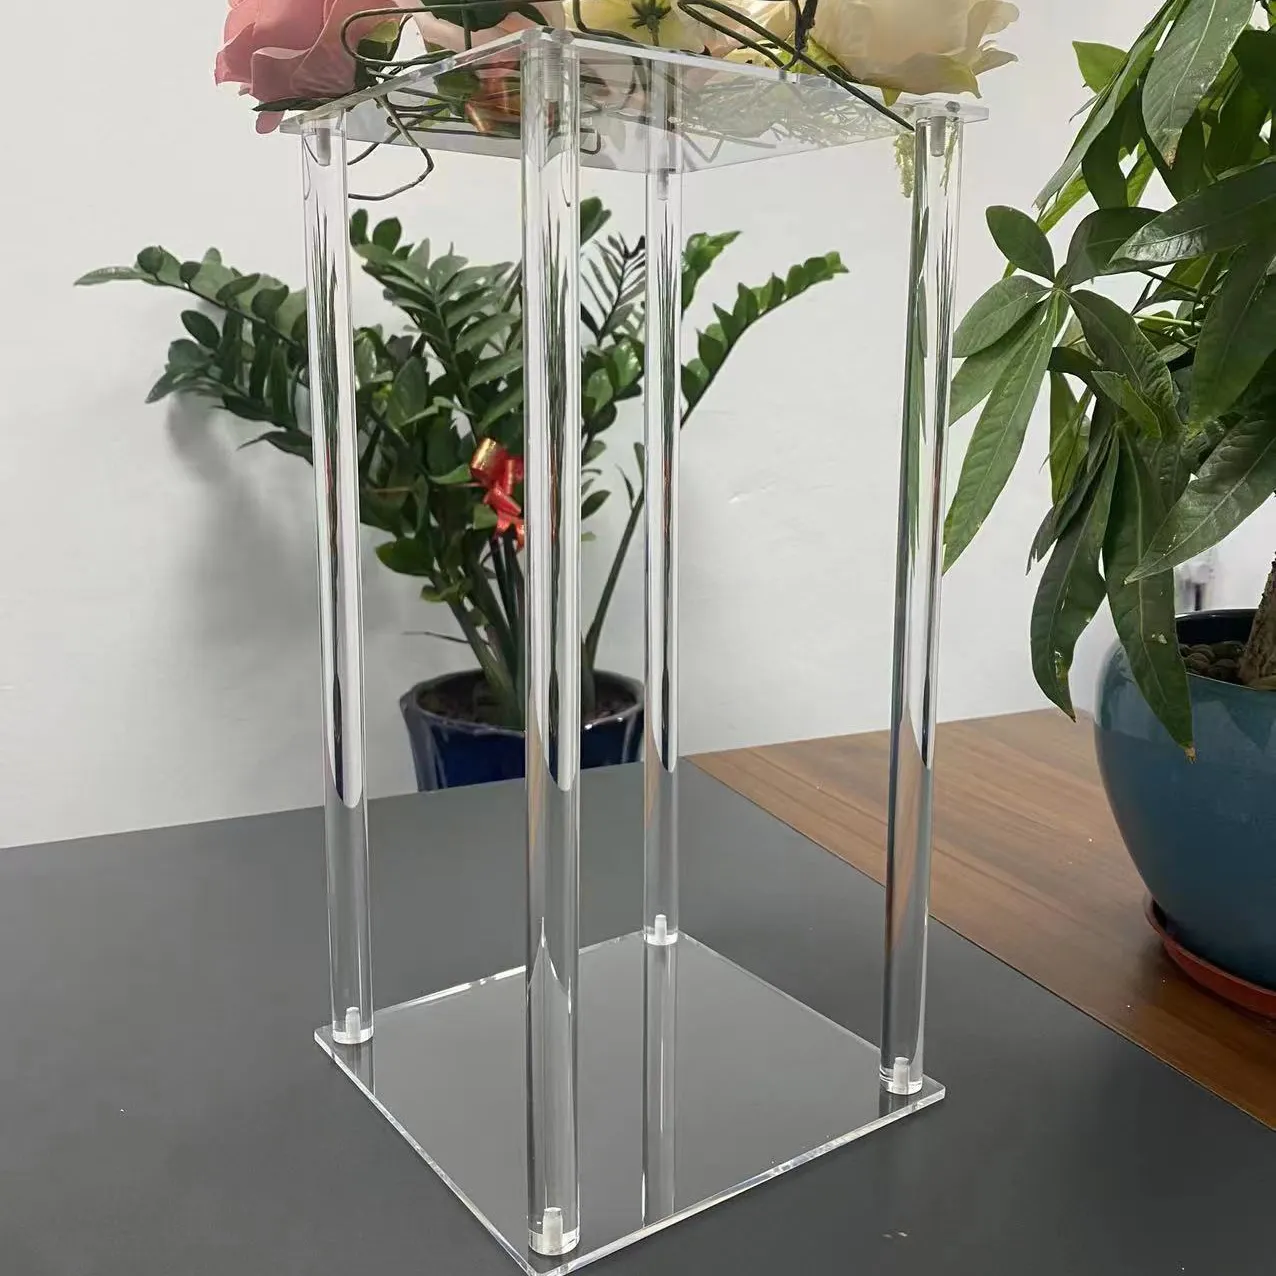 Acrylic Wedding Centerpieces for Table Column Flower Stand 31.5'' Tall Rectangular Flower Display Rack for Party Reception